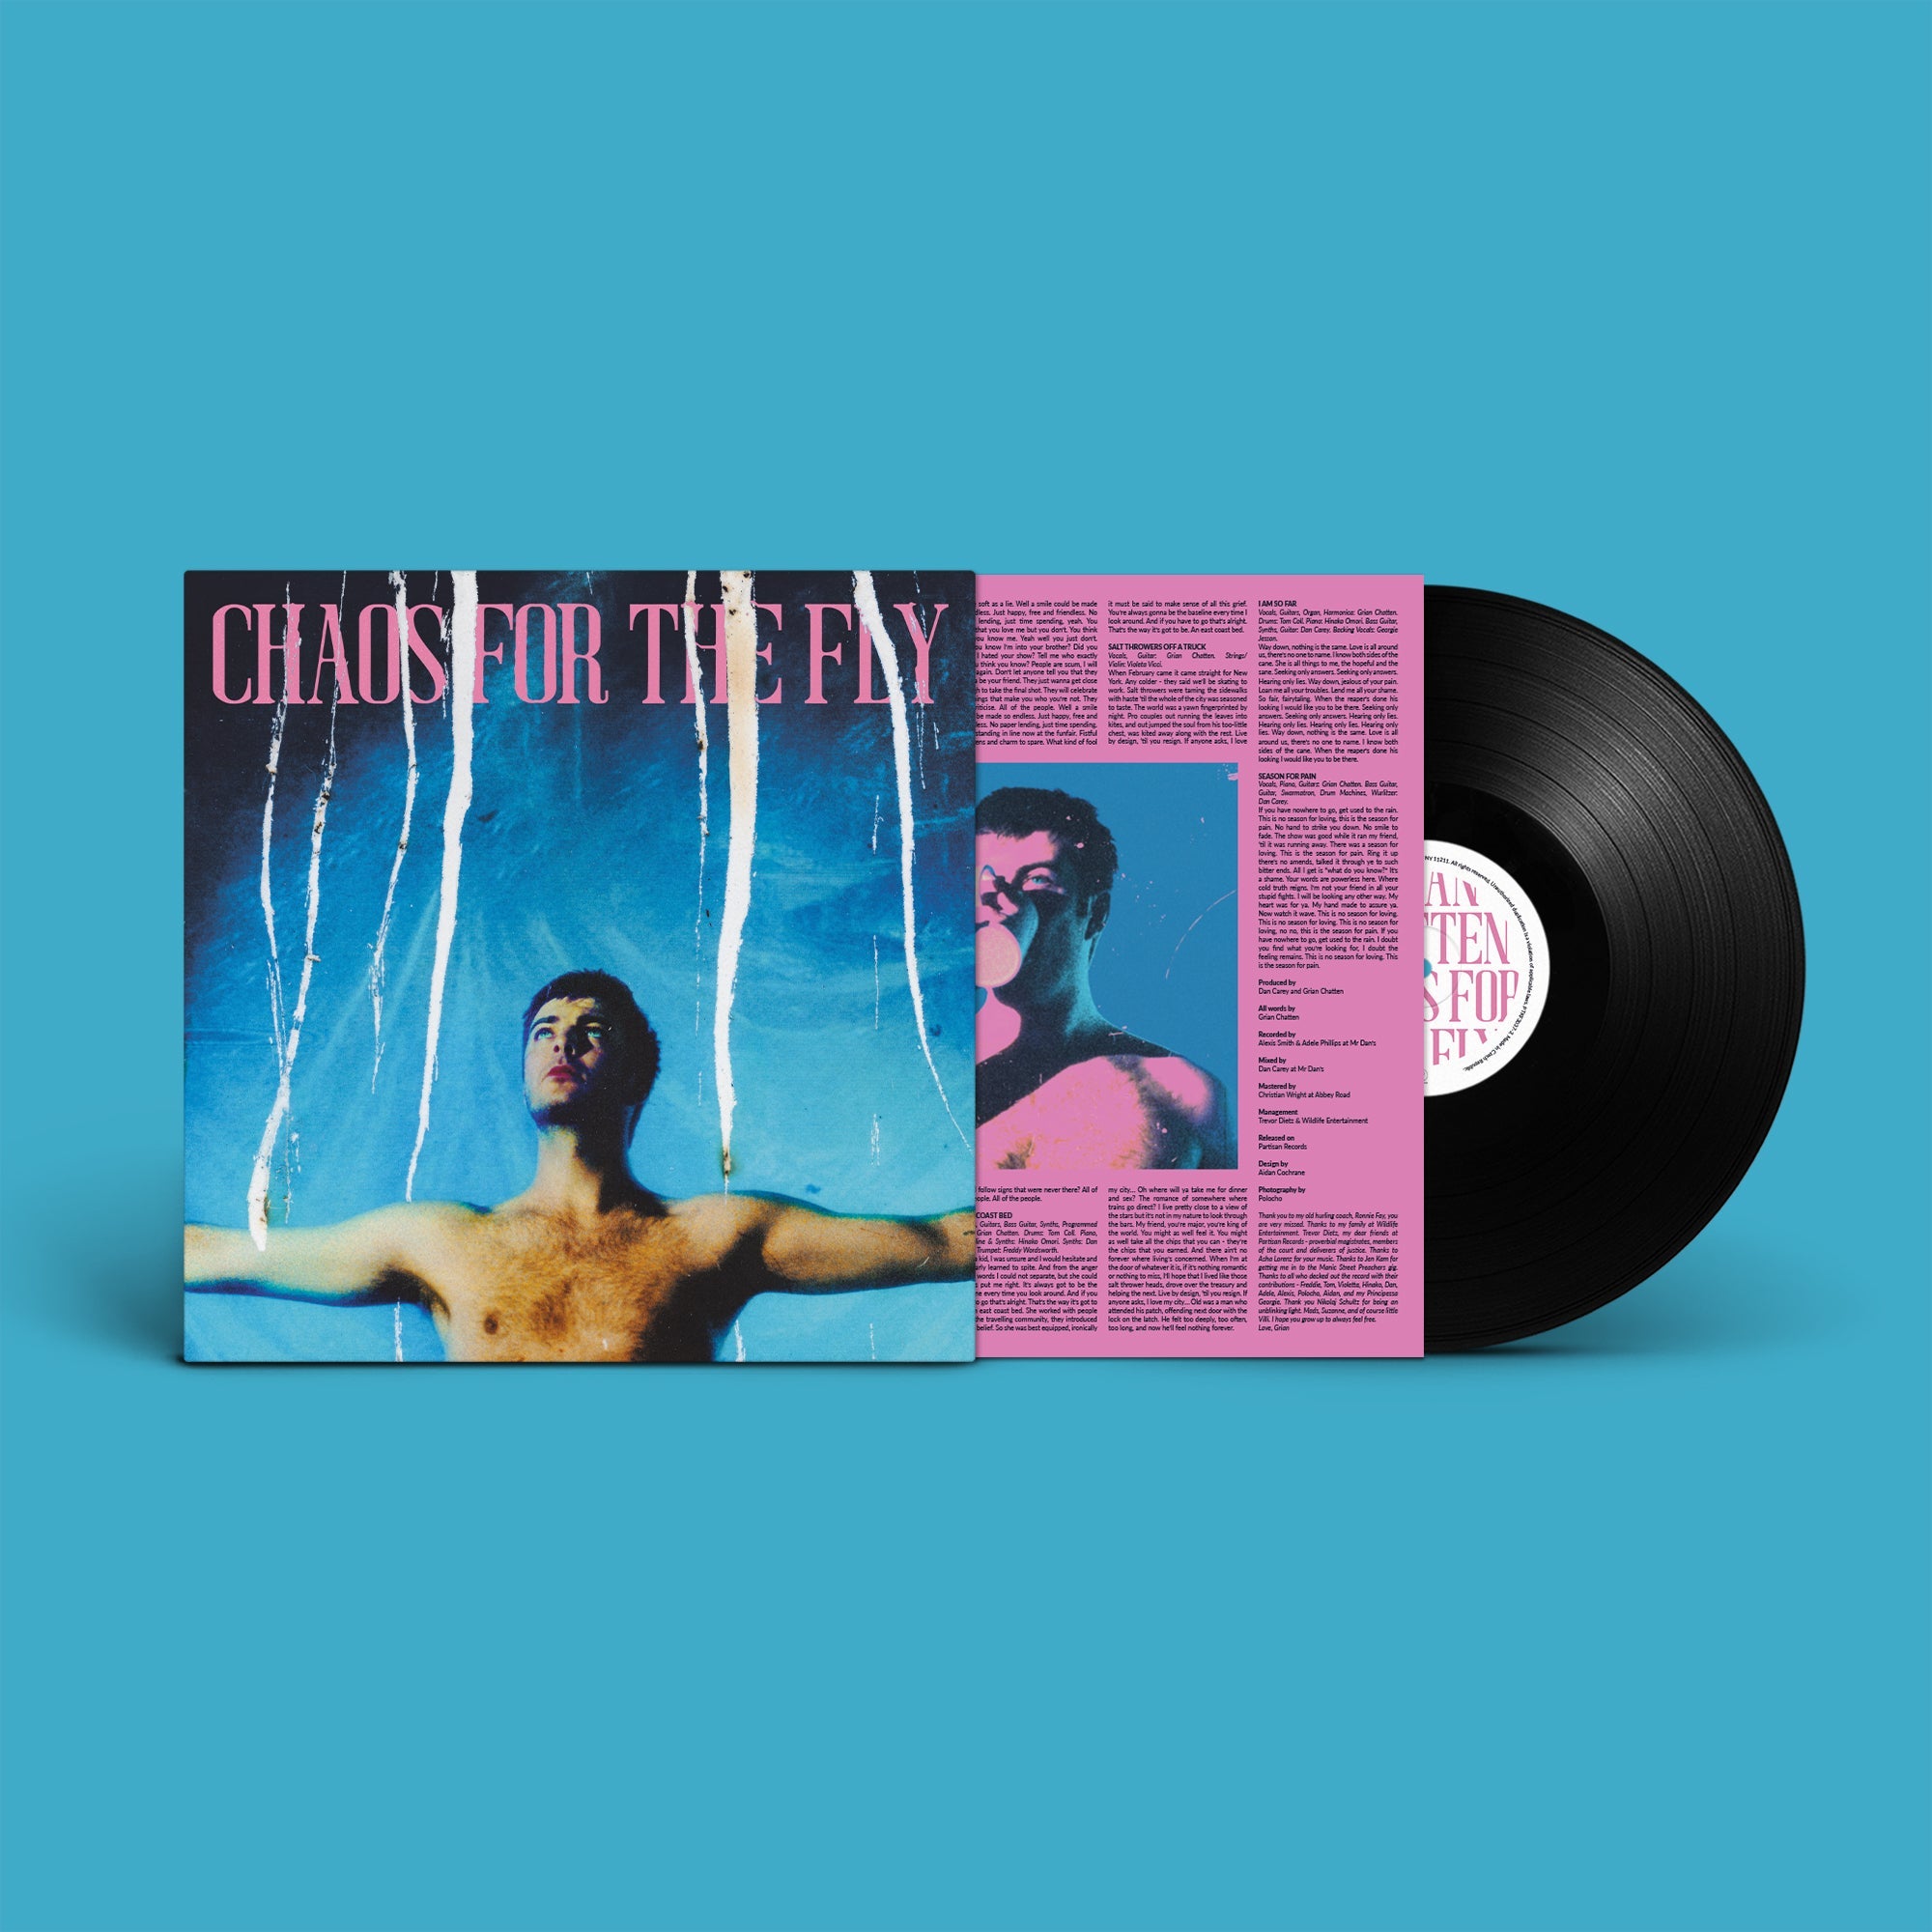 Chaos For The Fly: Vinyl LP + Exclusive Art Prints (#1 & #2)